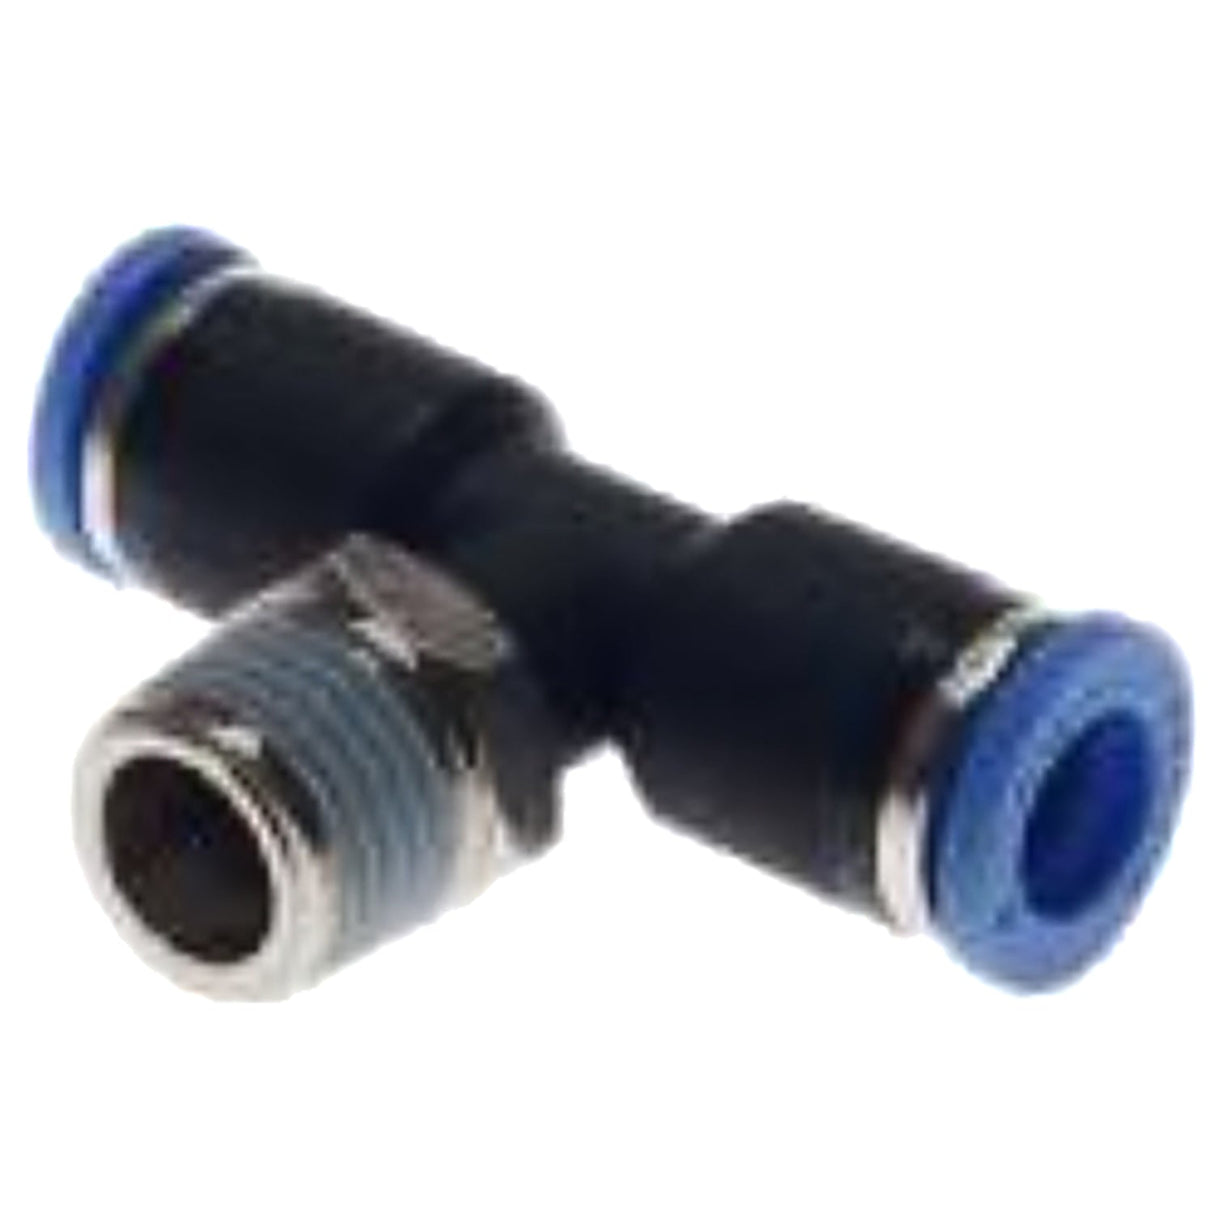 Male Threaded Coupling T